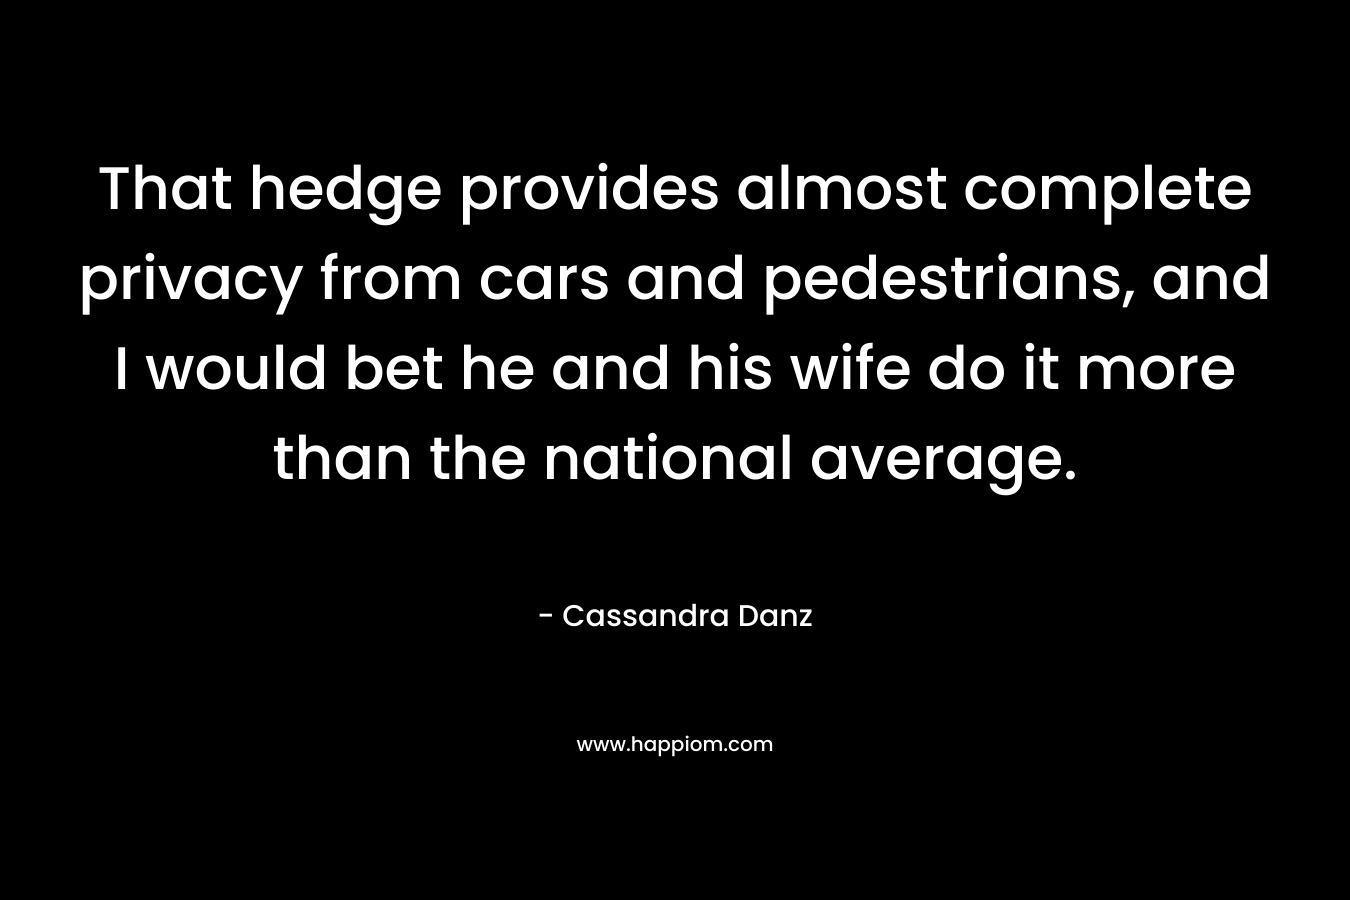 That hedge provides almost complete privacy from cars and pedestrians, and I would bet he and his wife do it more than the national average. – Cassandra Danz